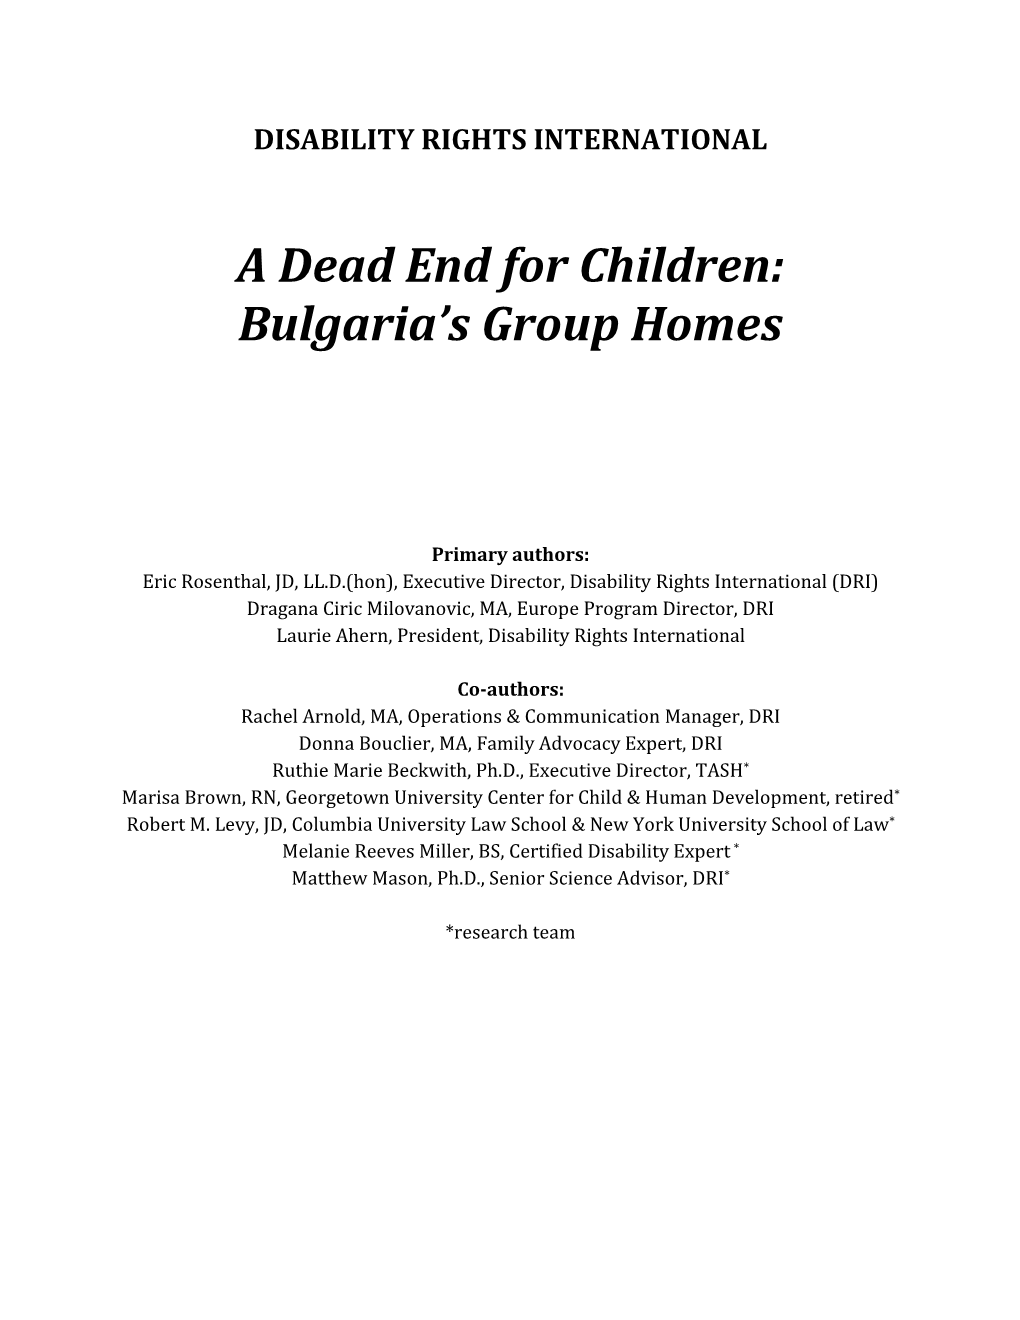 A Dead End for Children: Bulgaria's Group Homes